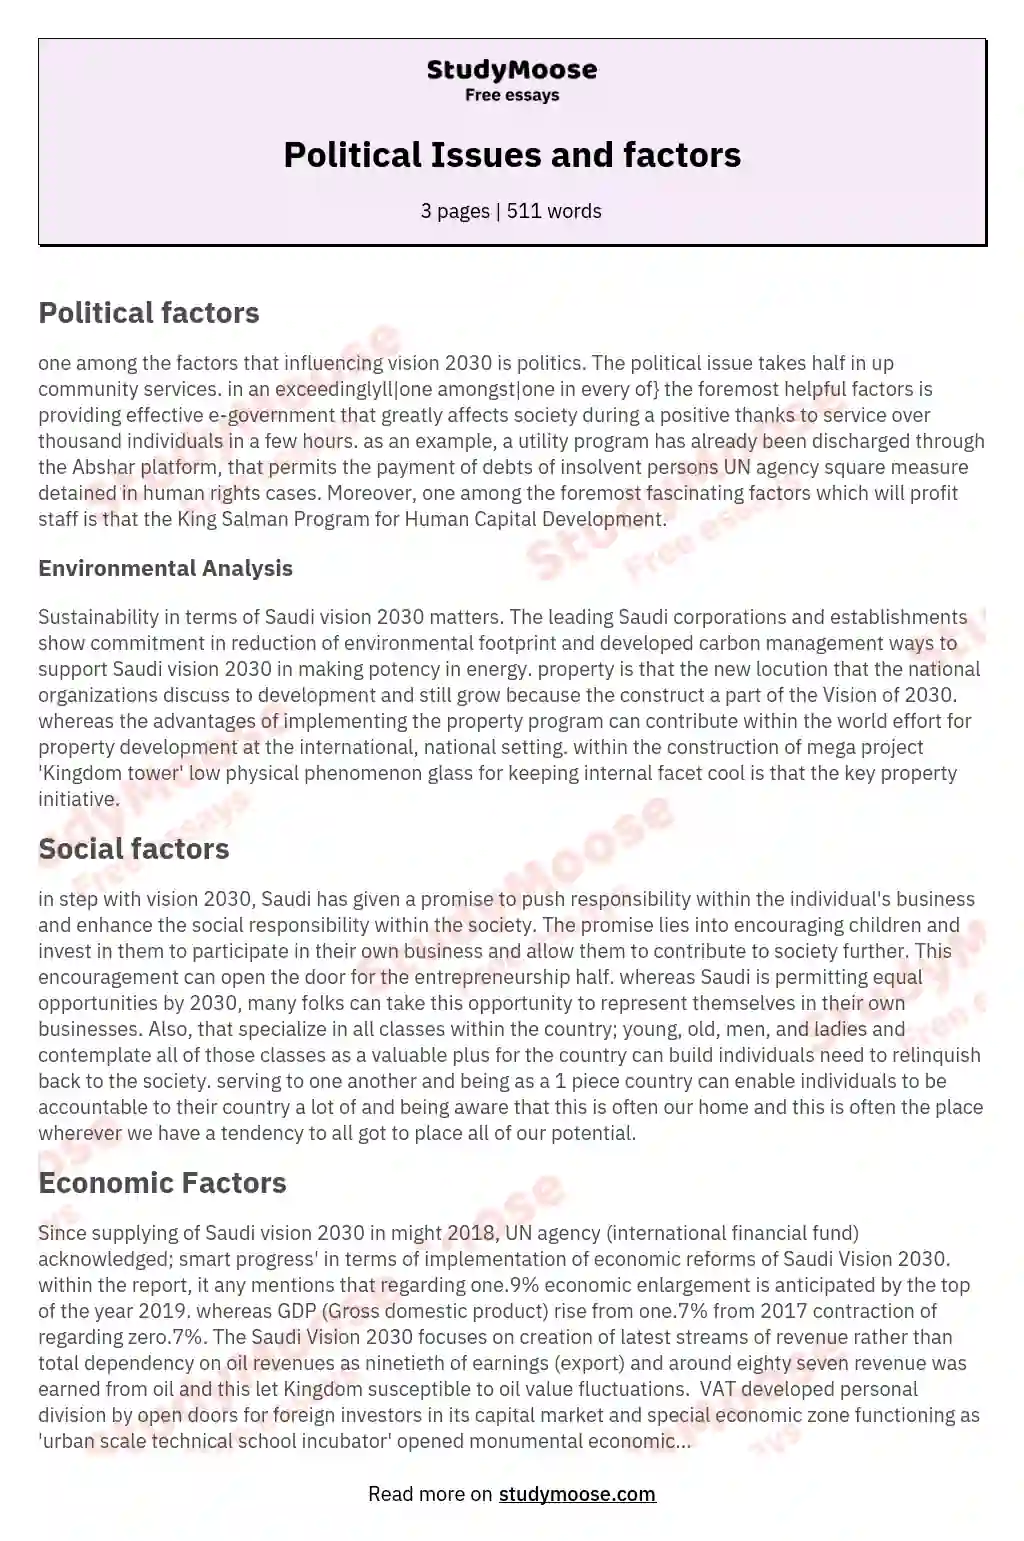 Political Issues and factors essay